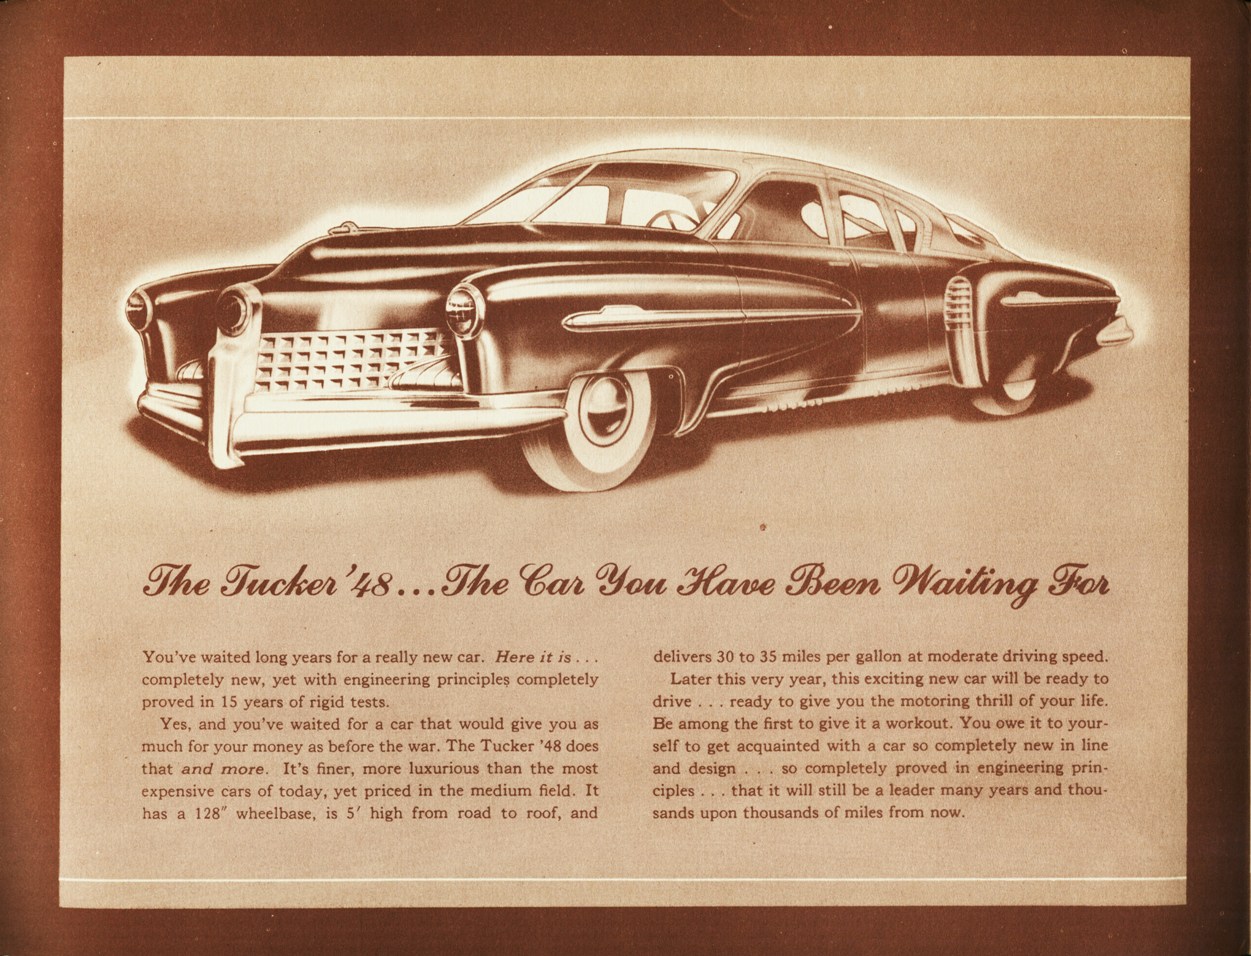 Tucker with Pre-Production Trim - One of several drawings produced by Alex Tremulis in February 1947 for advertising the new design of the Tucker '48